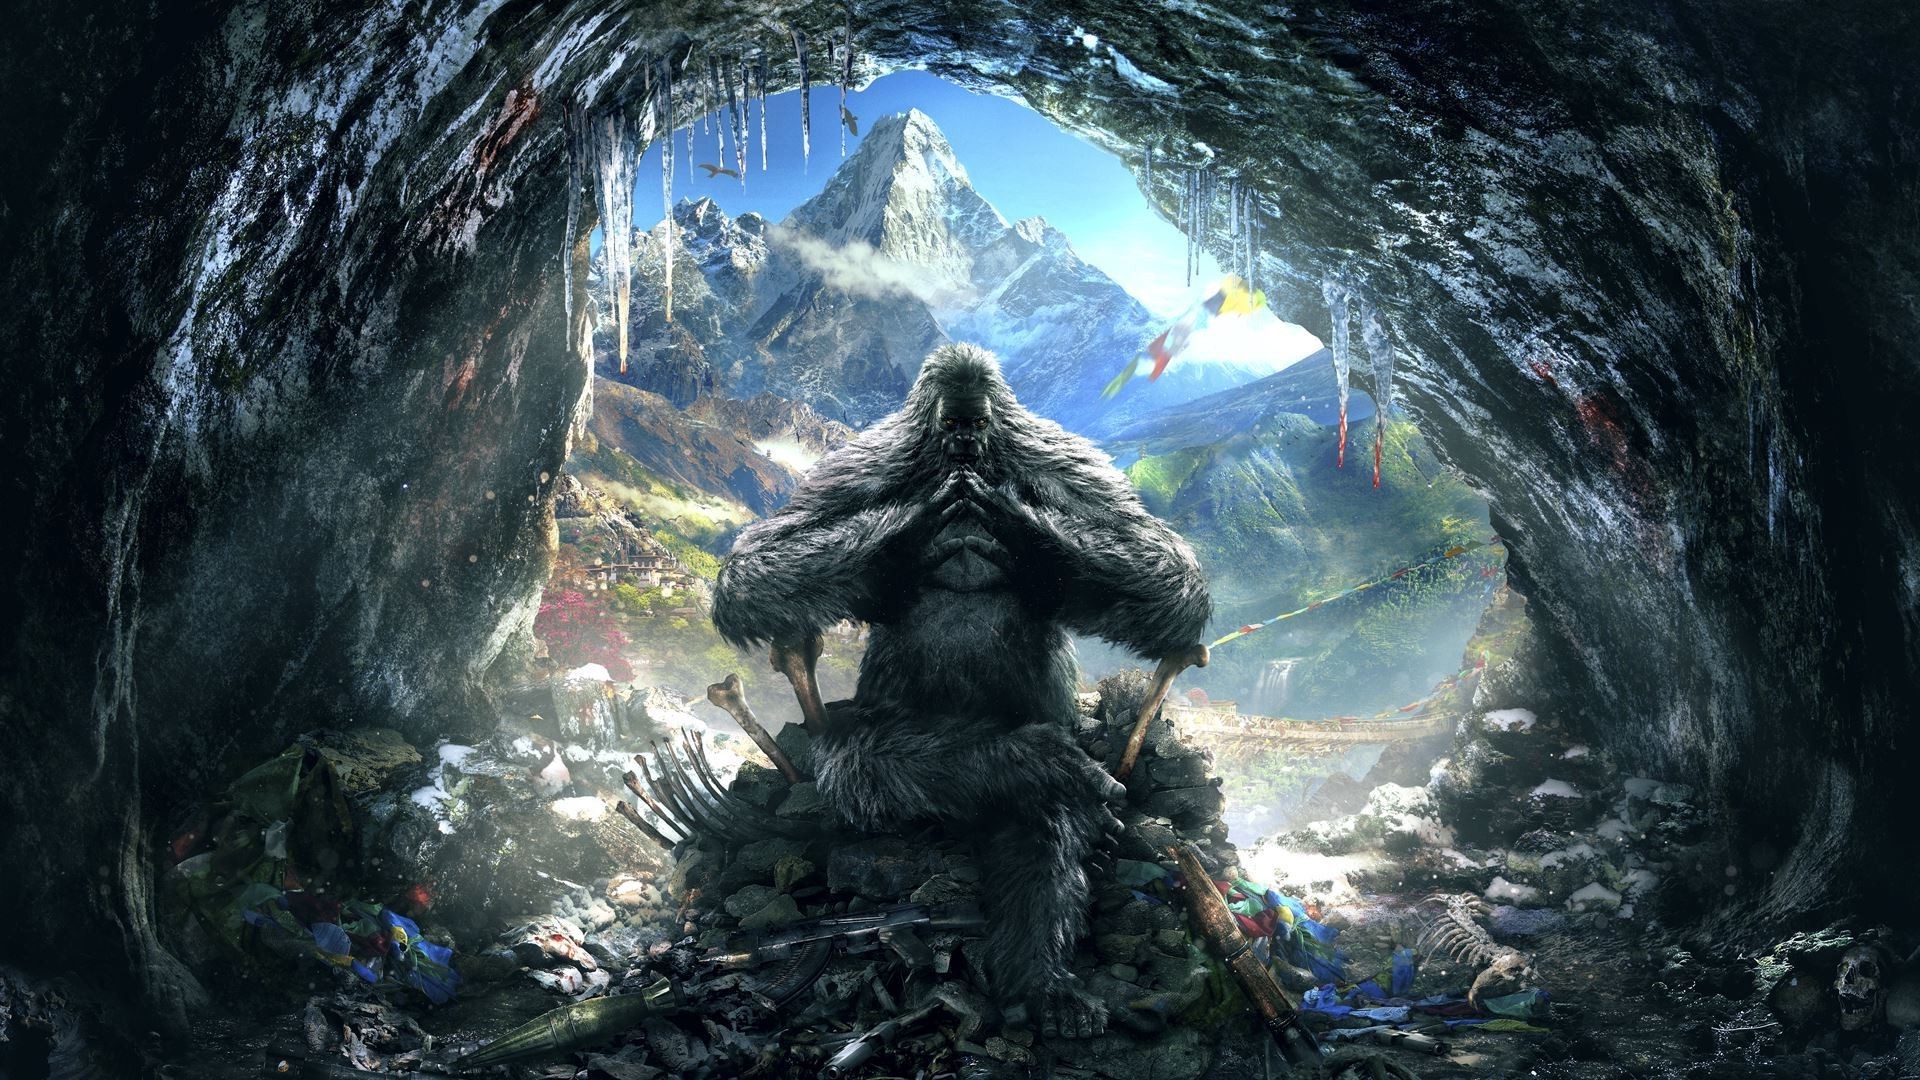 4k far cry 4 download free